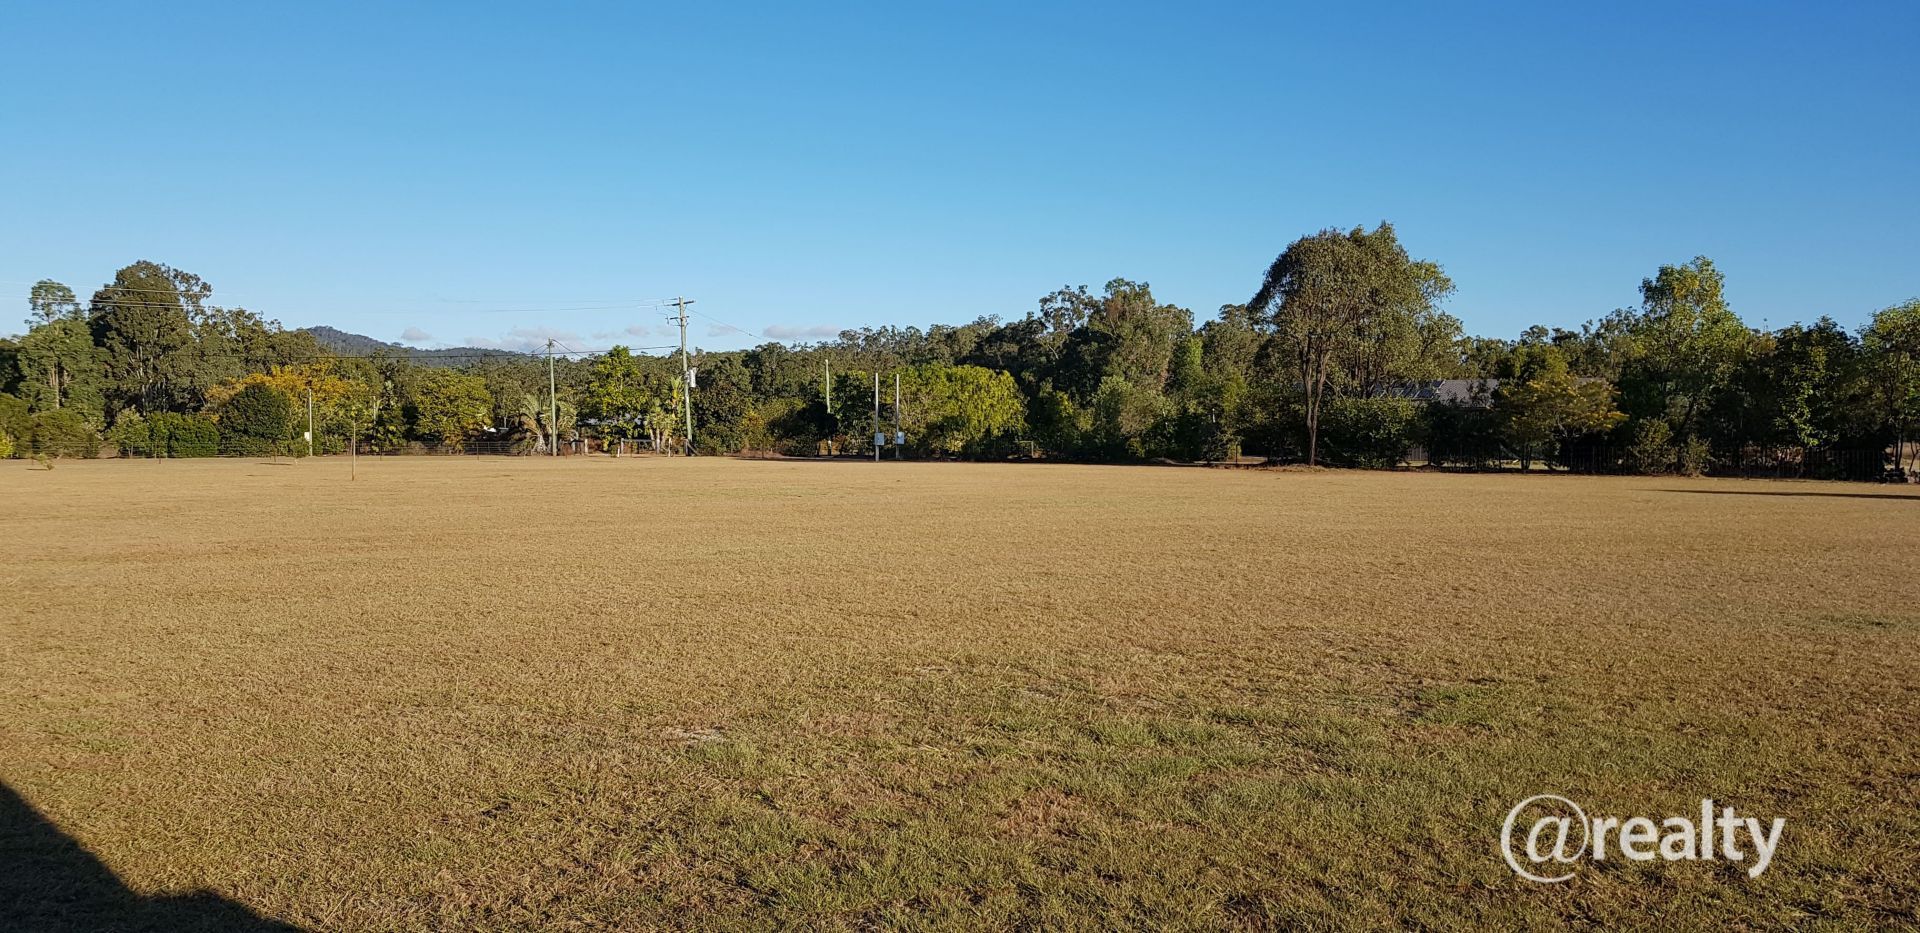 Millstream QLD 4888 vacant land for Sale, $140,000 